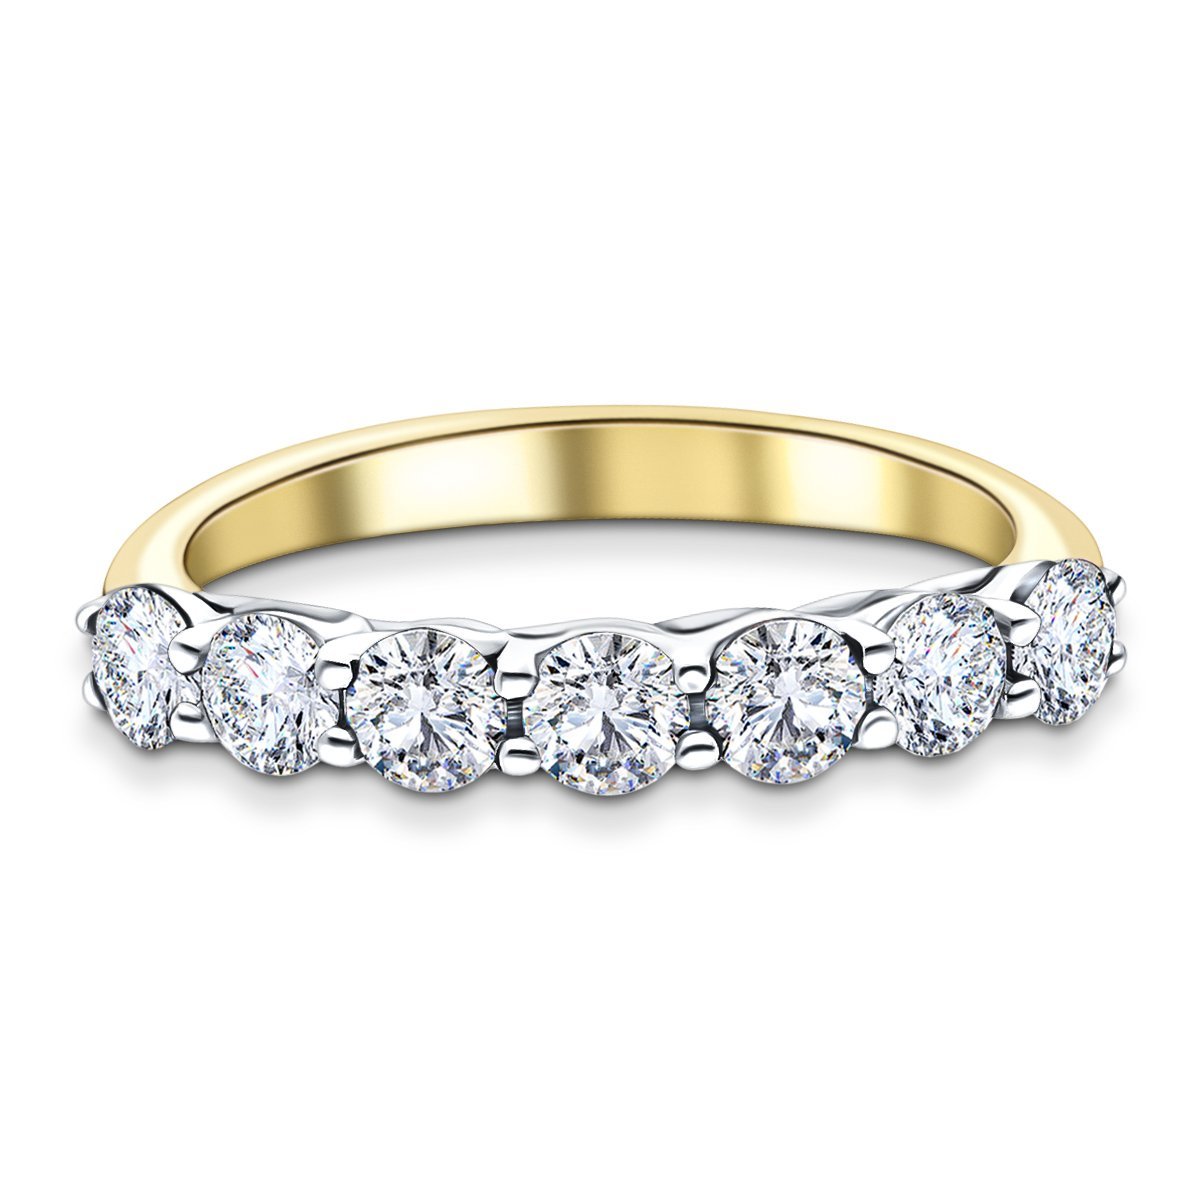 Seven Stone Diamond Ring with 1.00ct G/SI Quality in 18k Yellow Gold - All Diamond